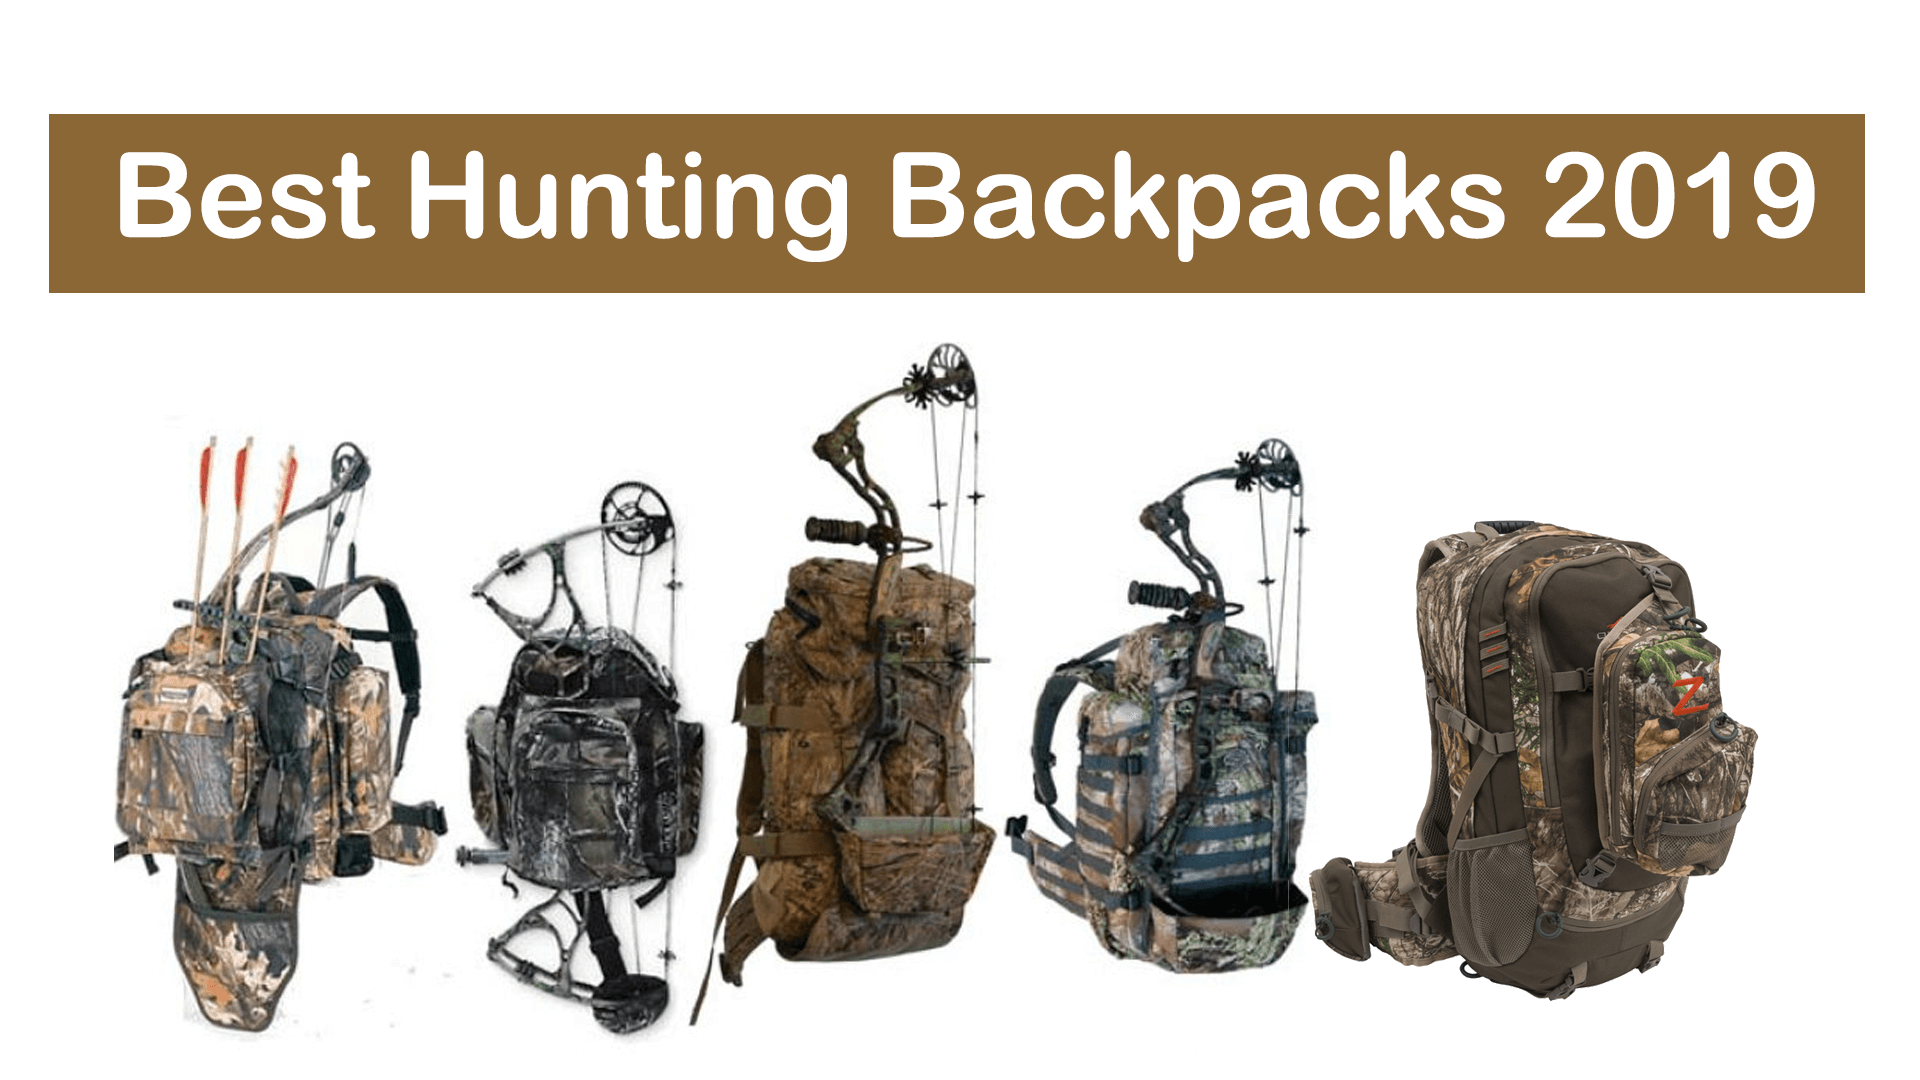 Best Hunting Backpacks review - 2019